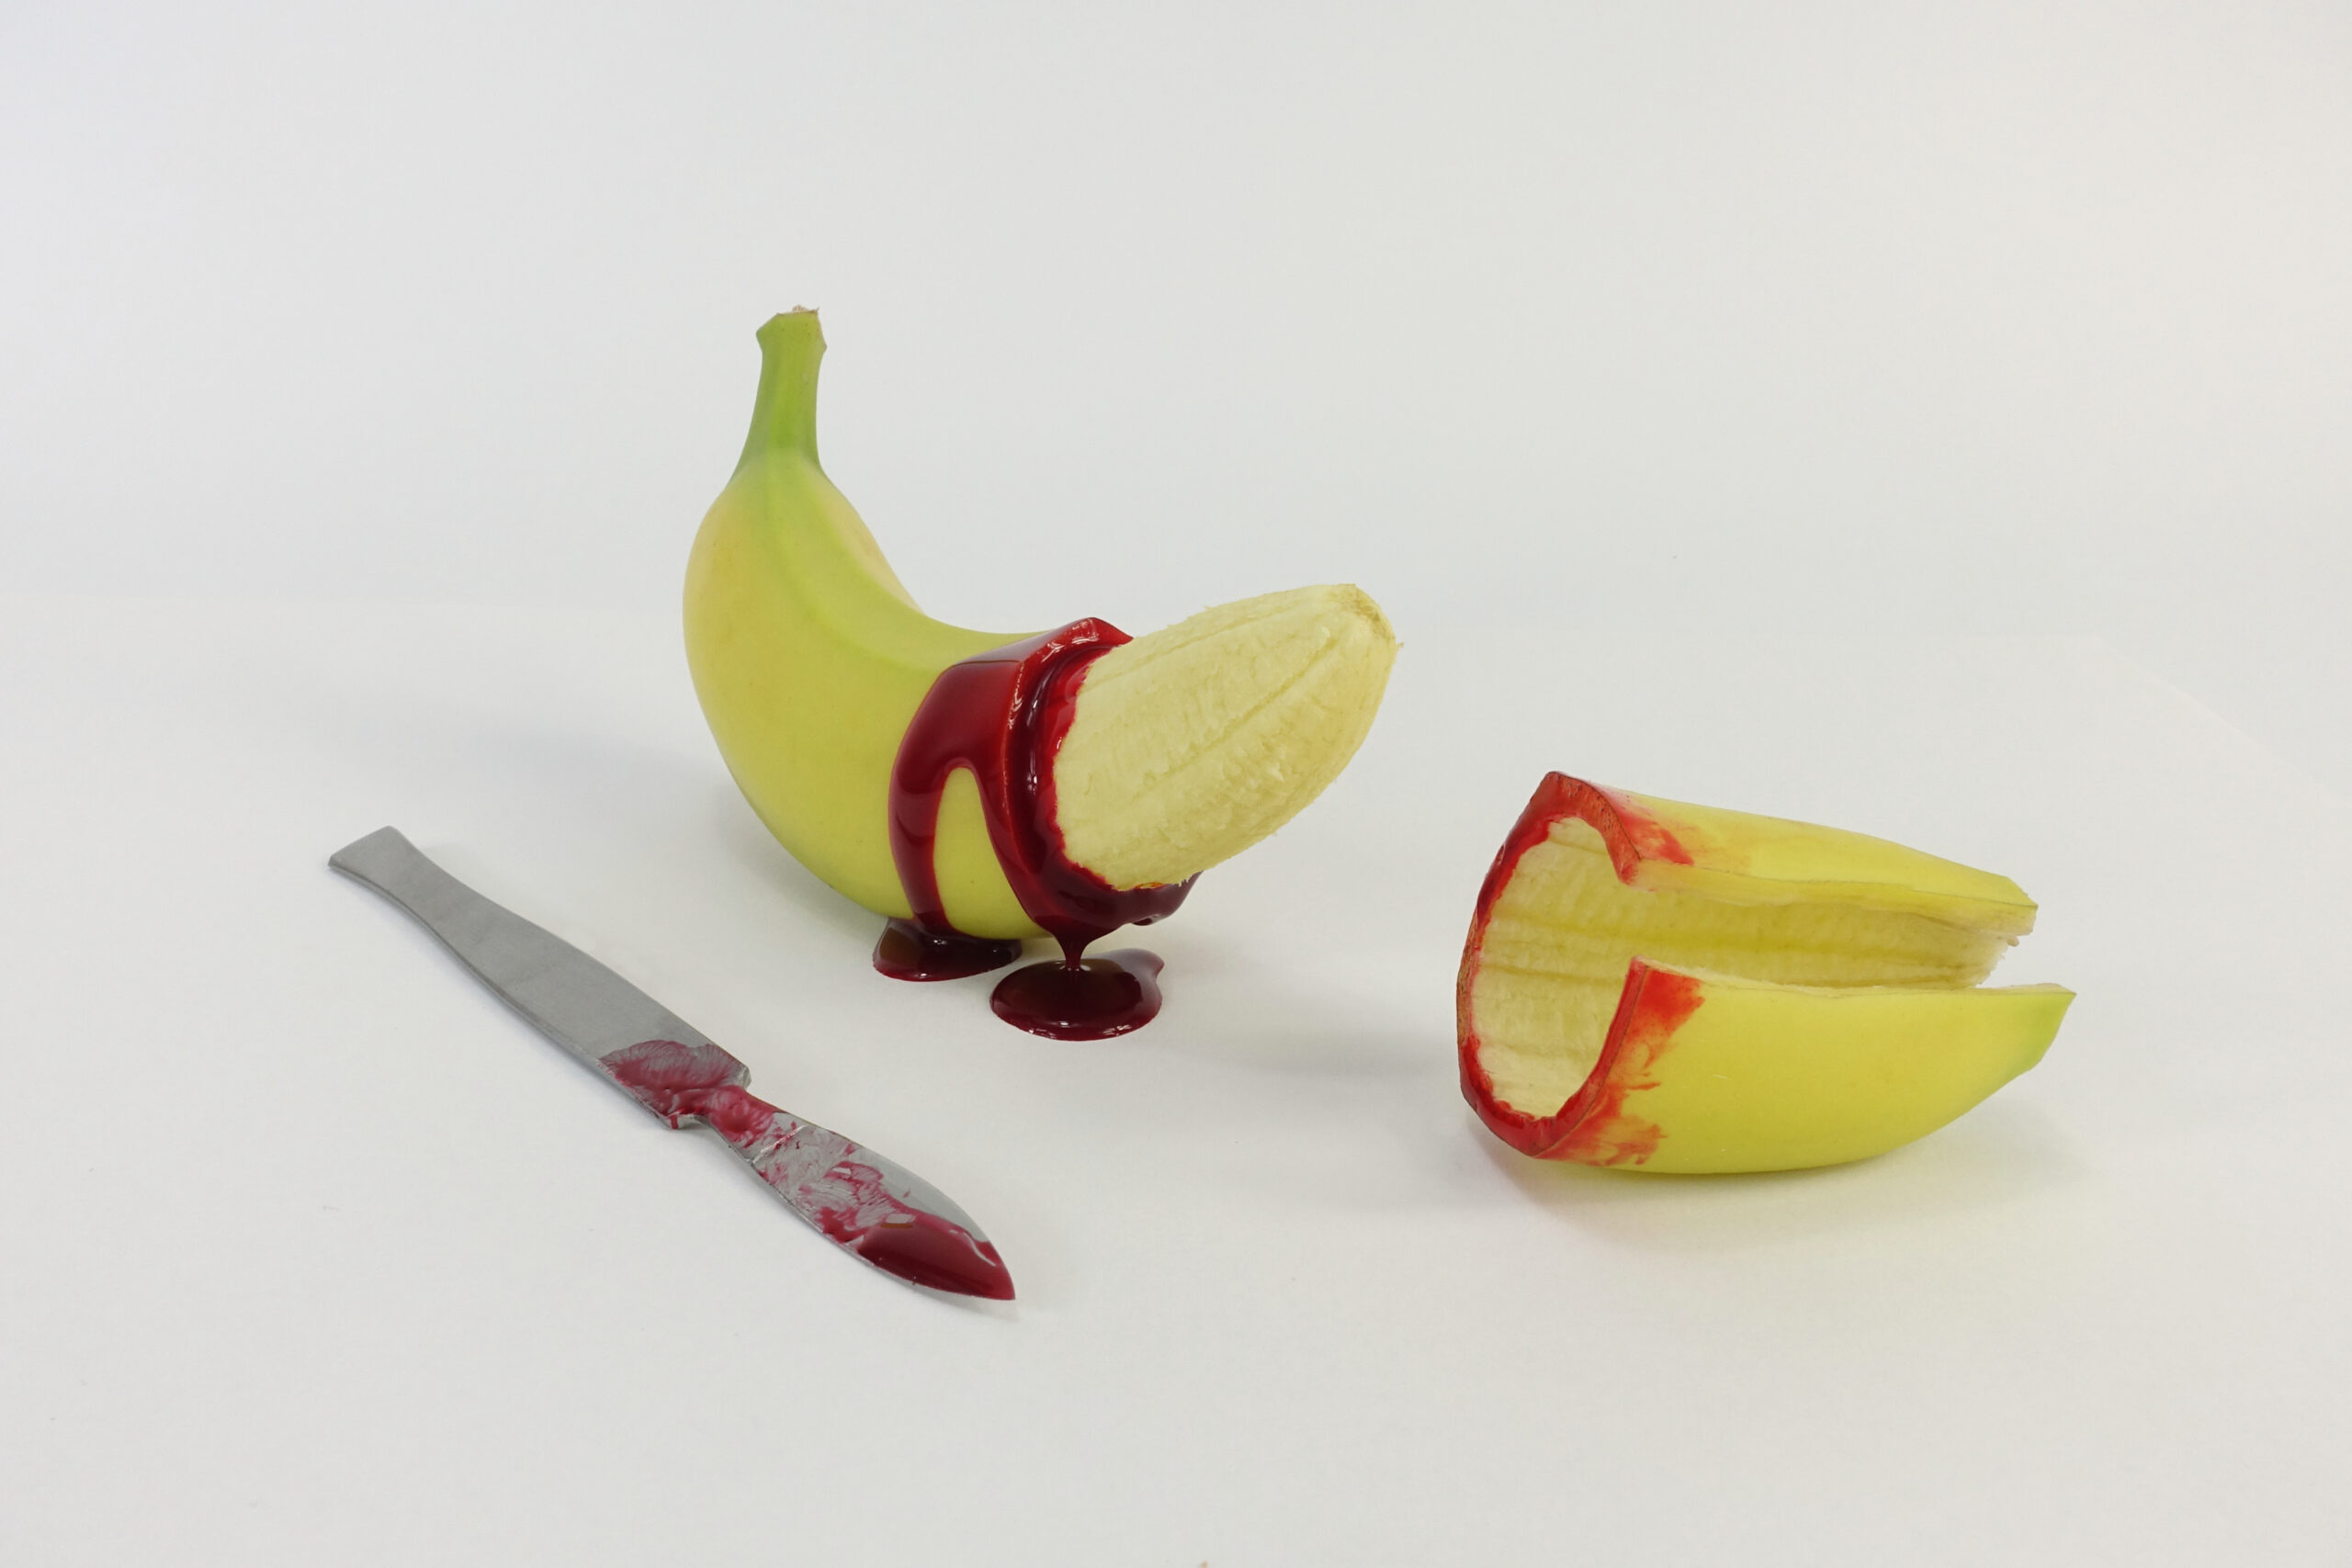 There are just some things about the circumcised banana... : r/Intactivism